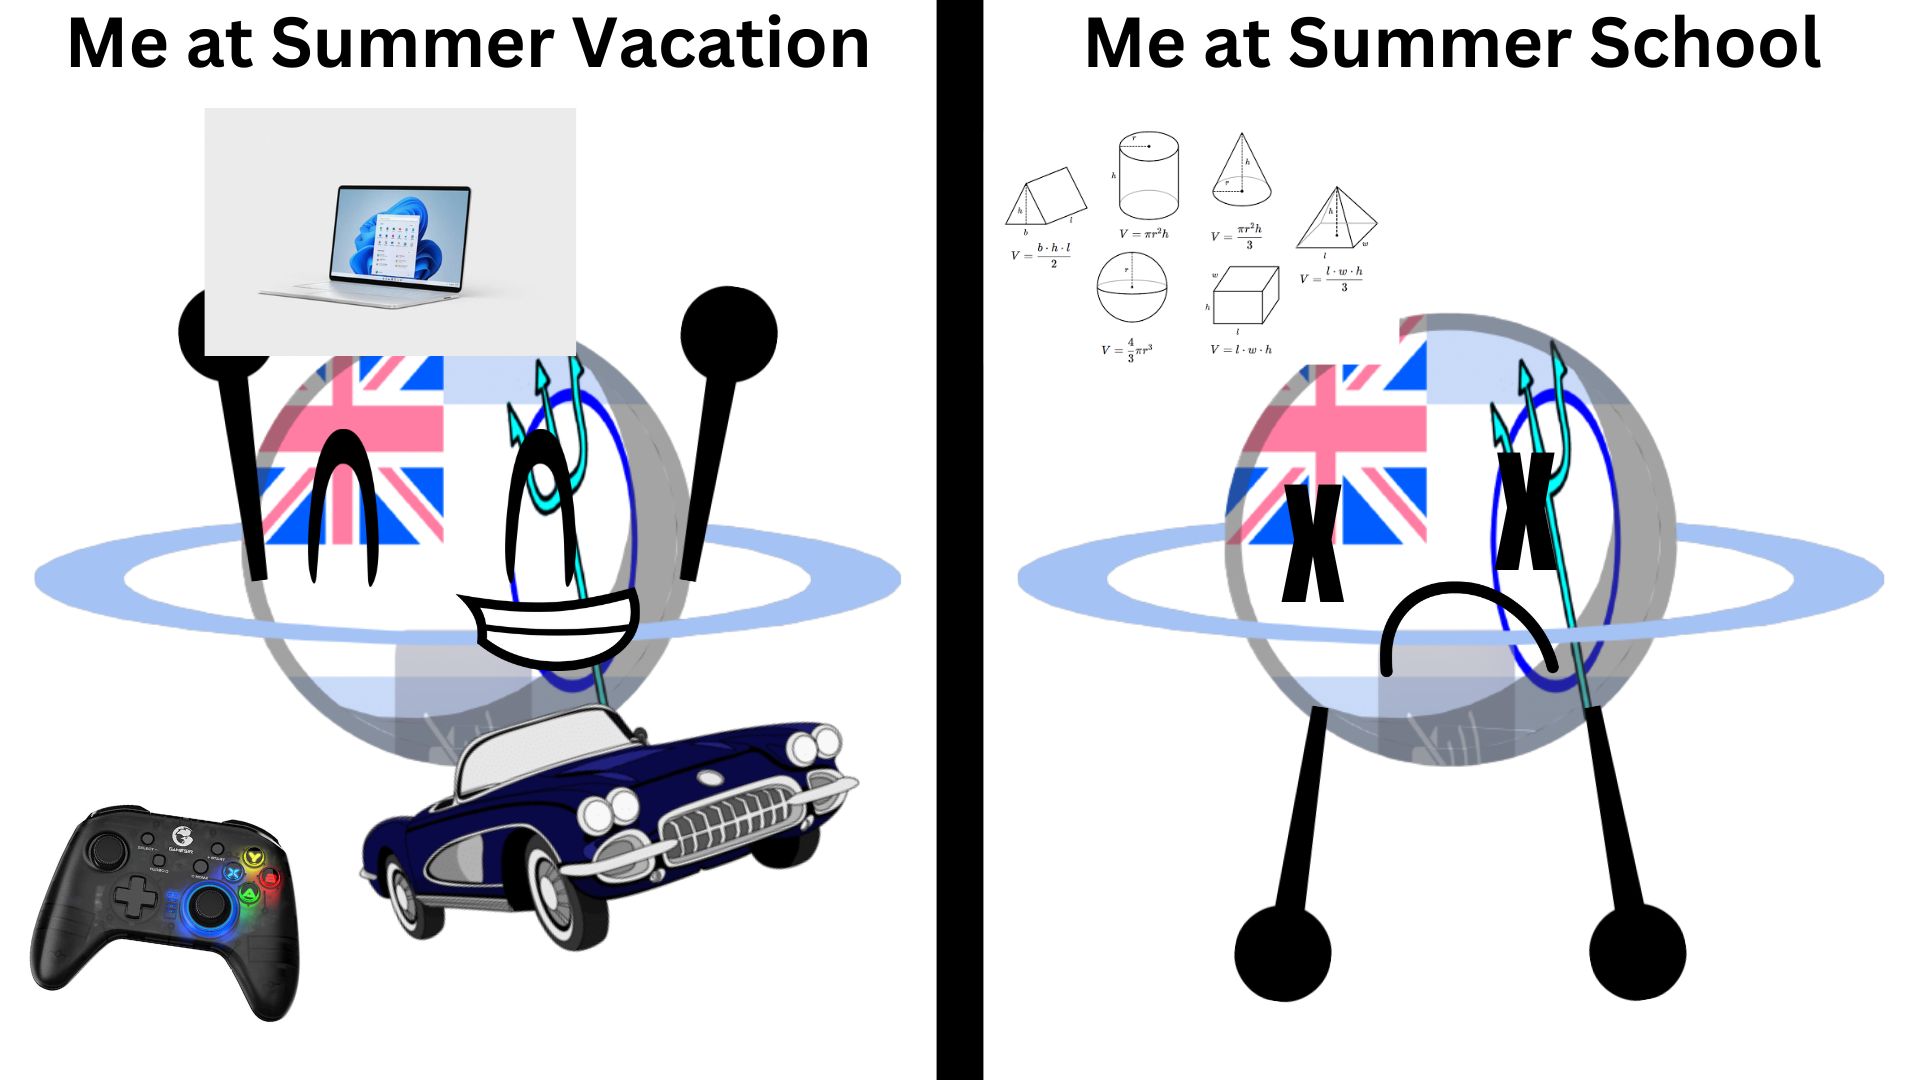 Me at Summer Vacation and me at Summer School Blank Meme Template